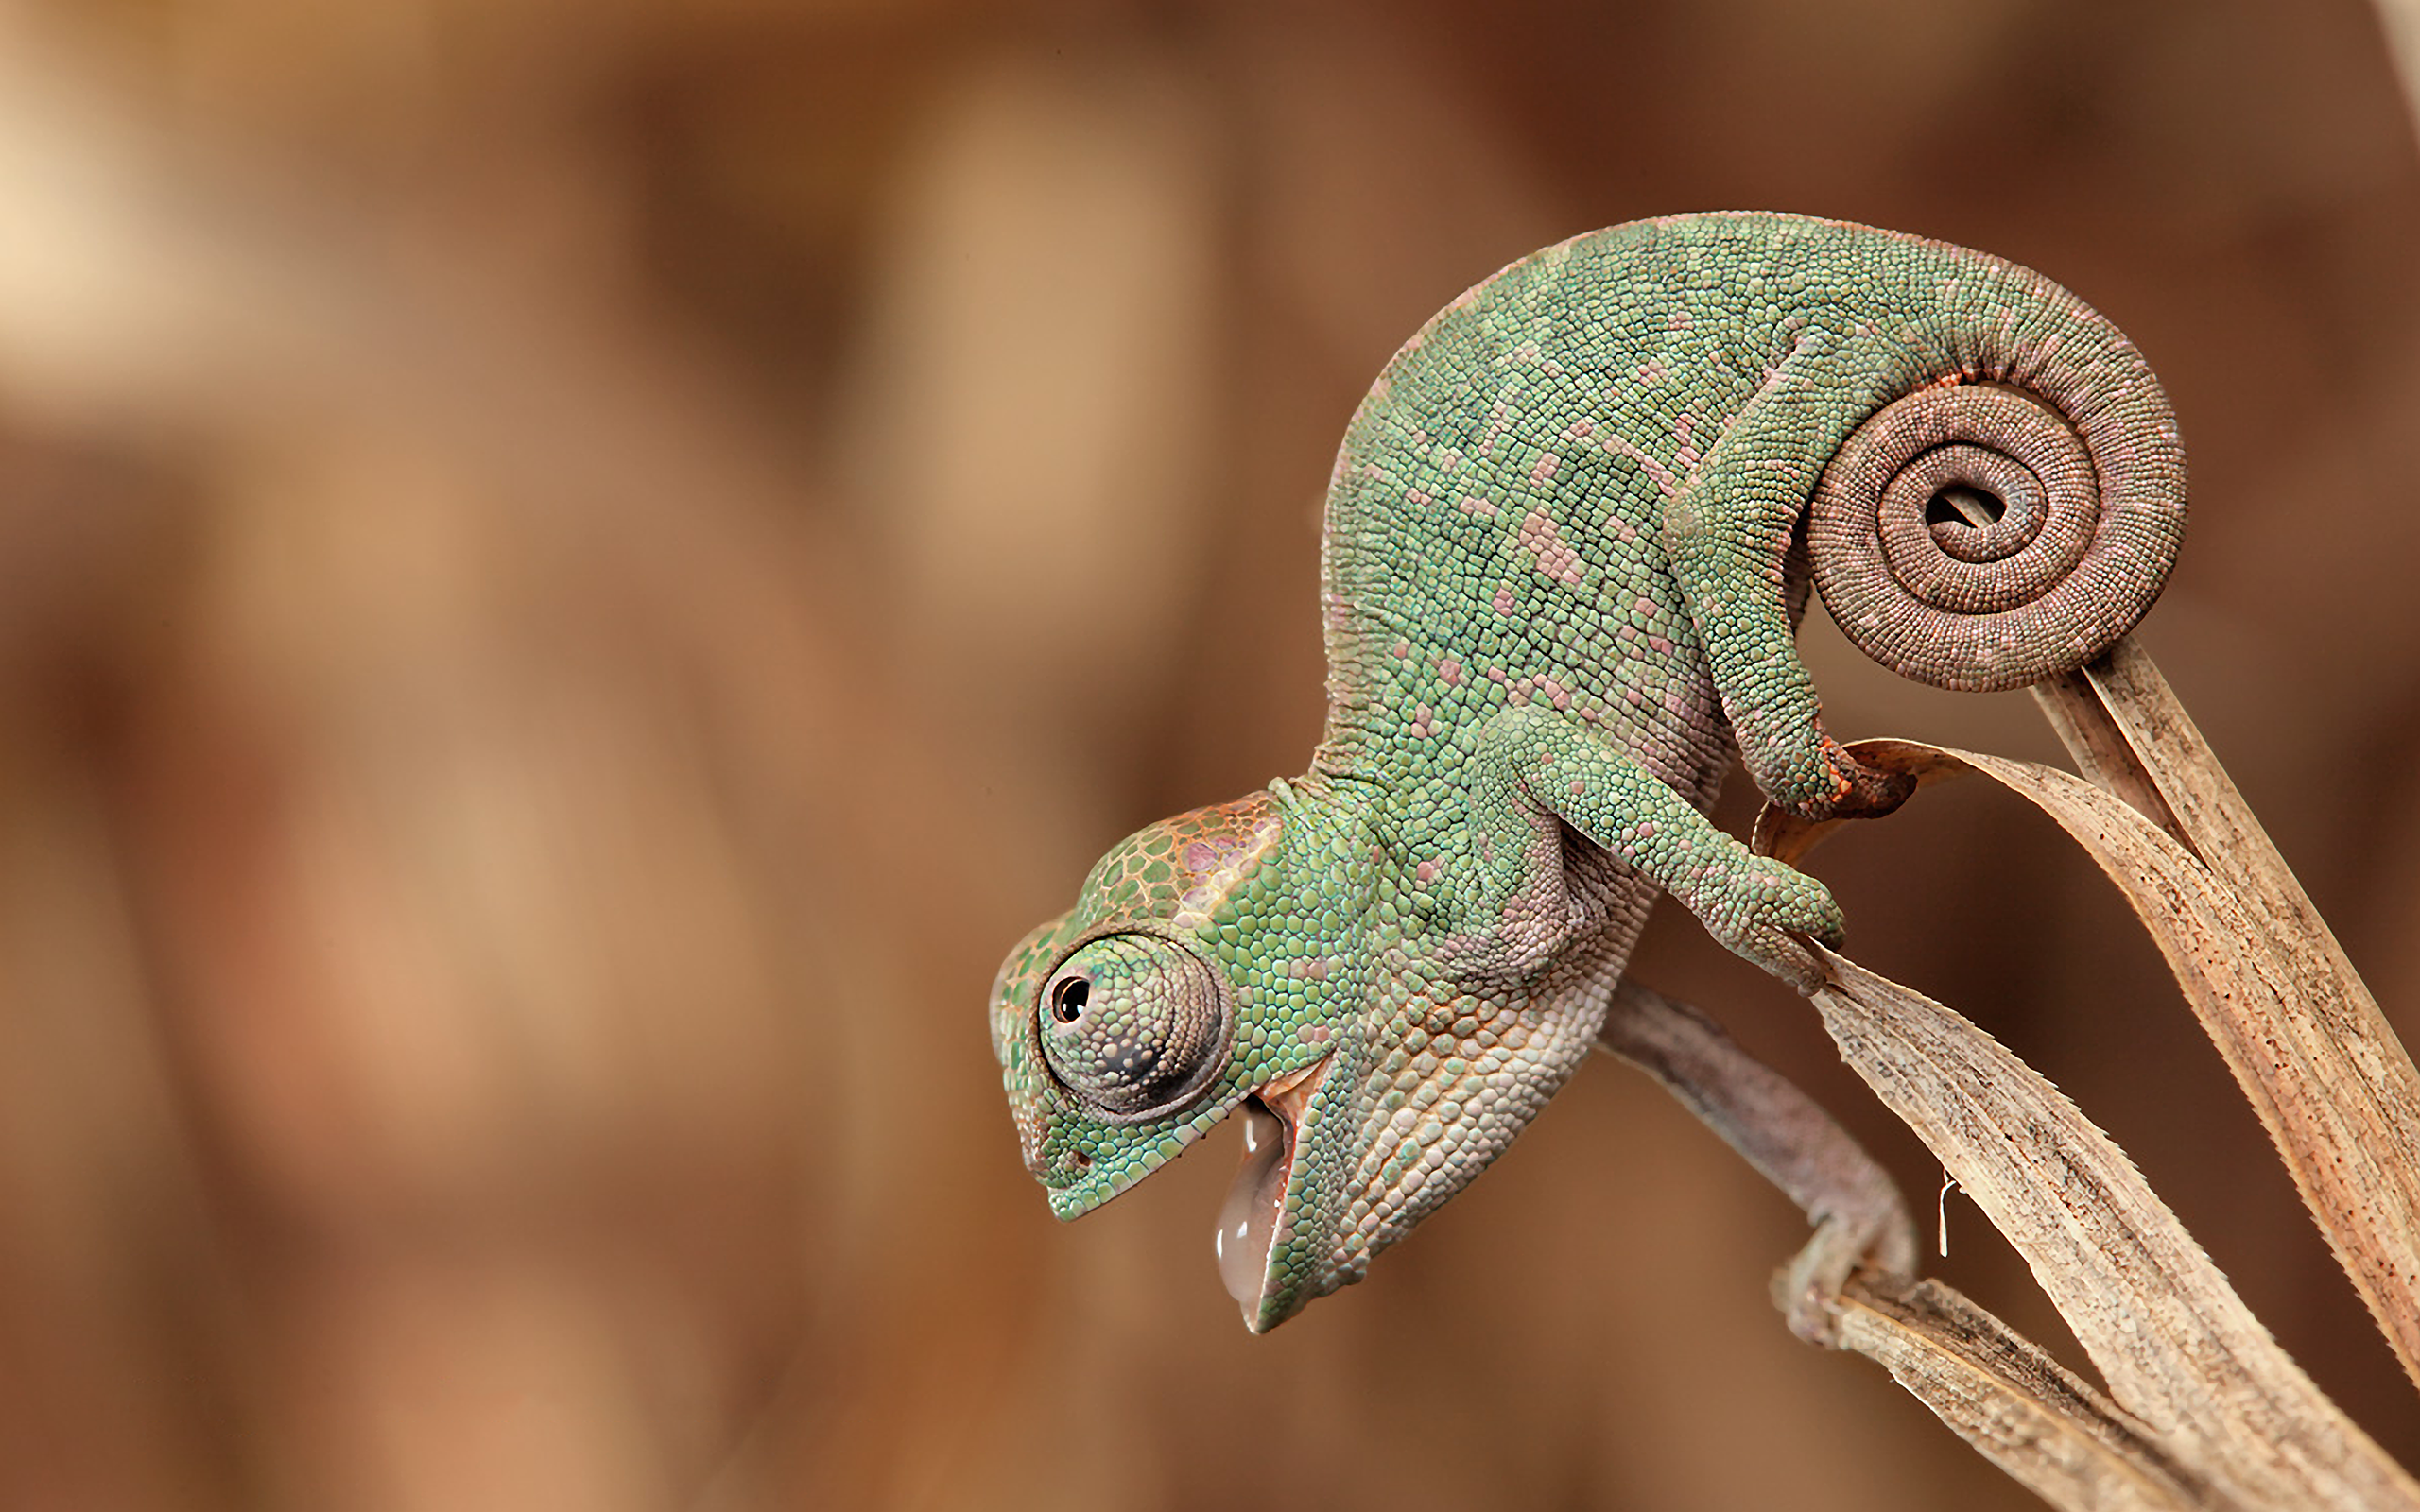 General 2560x1600 animals chameleons nature happy skin open mouth depth of field plants green tail closeup reptiles